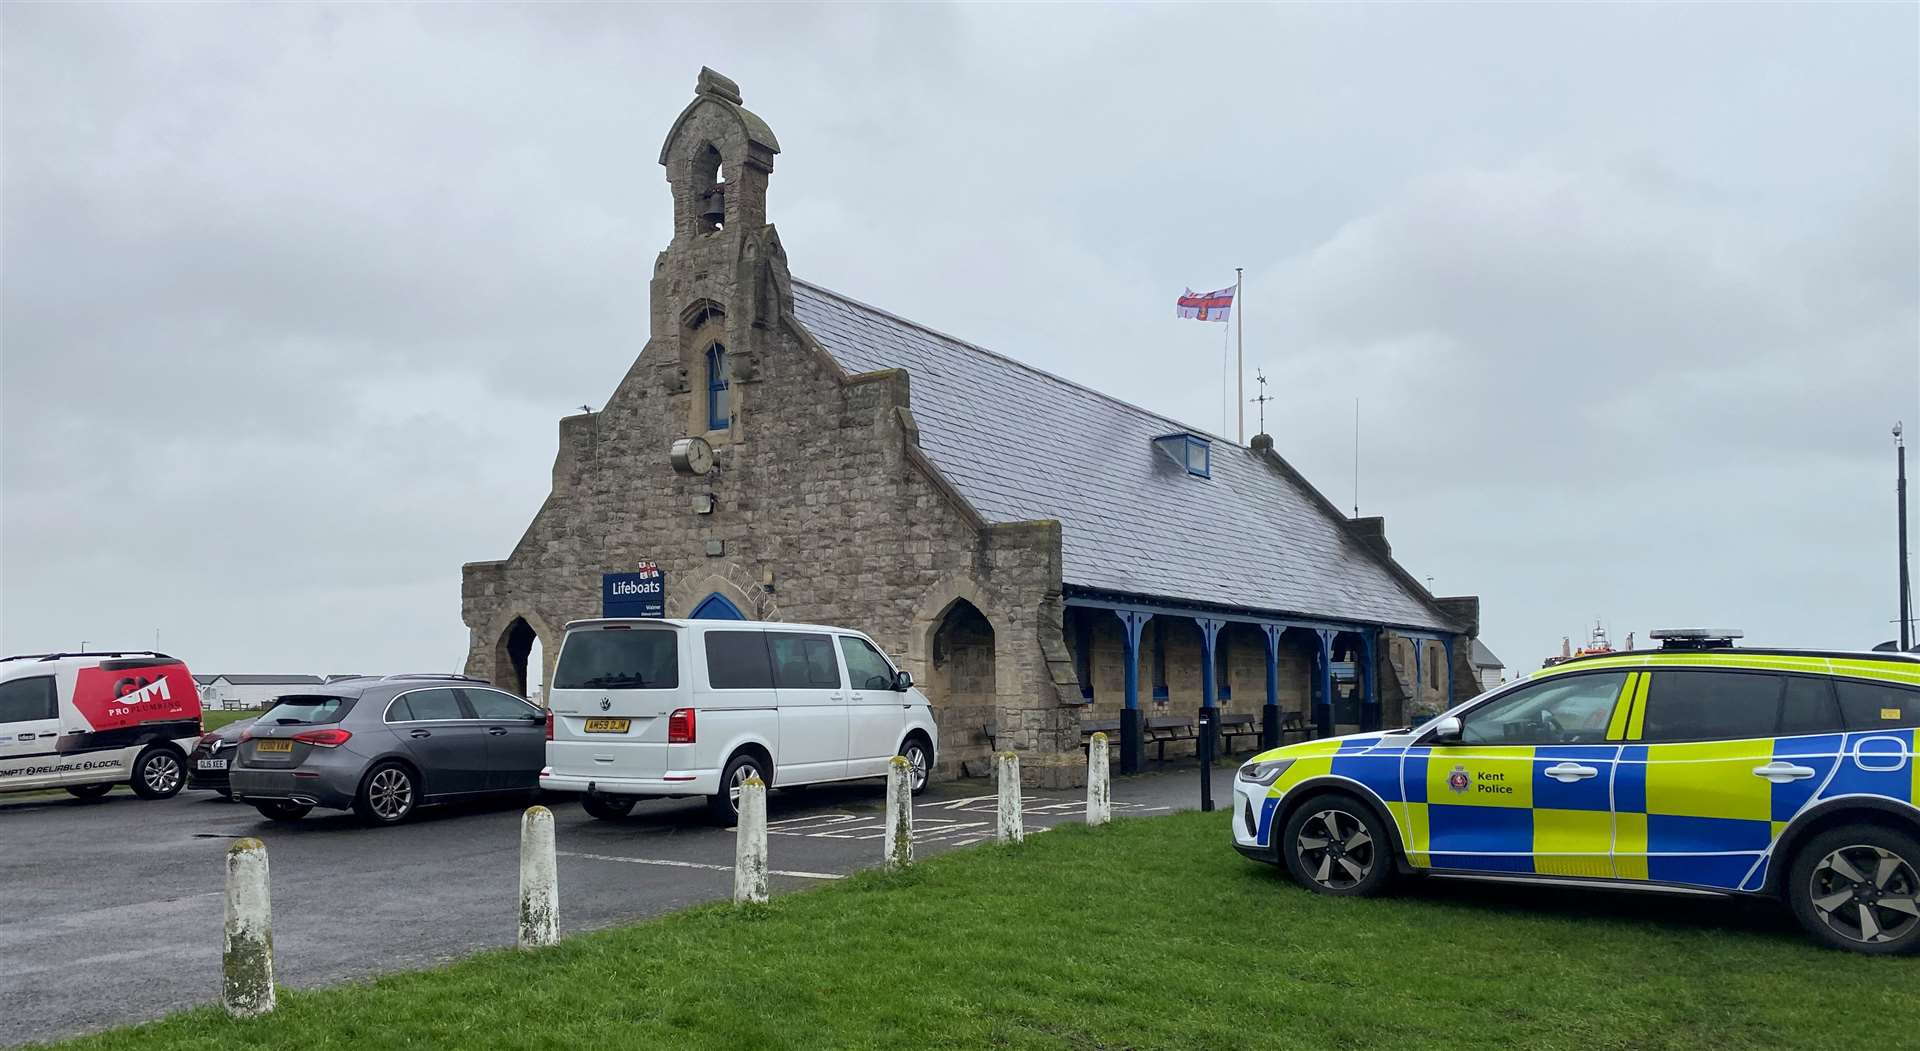 Multiple police cars have been spotted at Walmer Green